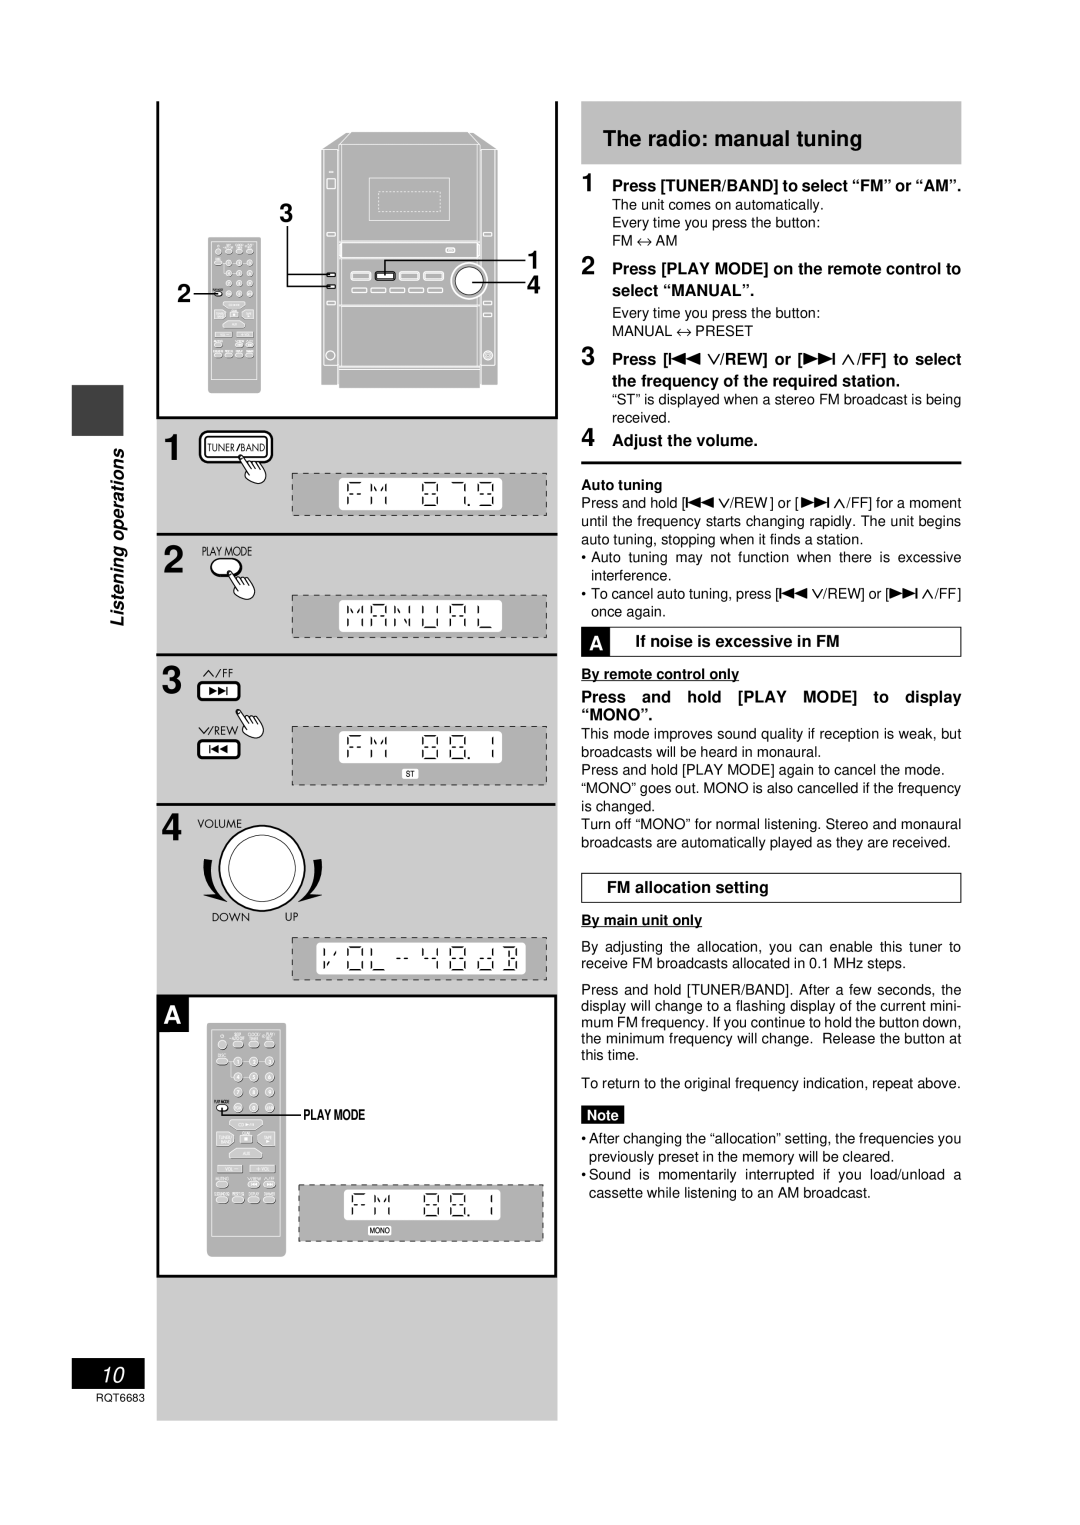 Panasonic SC-PM18 3 FF, The radio manual tuning, Listening, Press TUNER/BAND to select “FM” or “AM”, Adjust the volume 